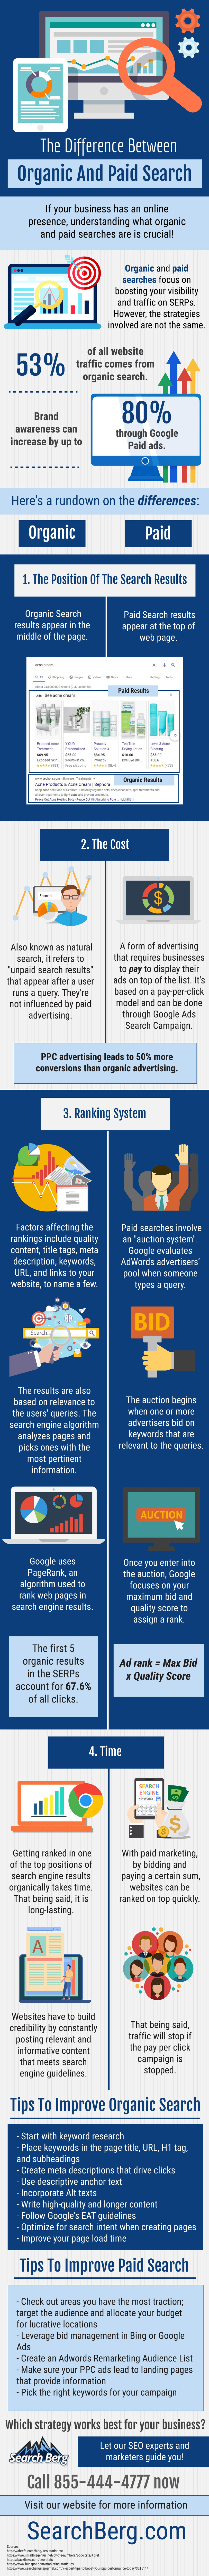 Difference between organic and paid search